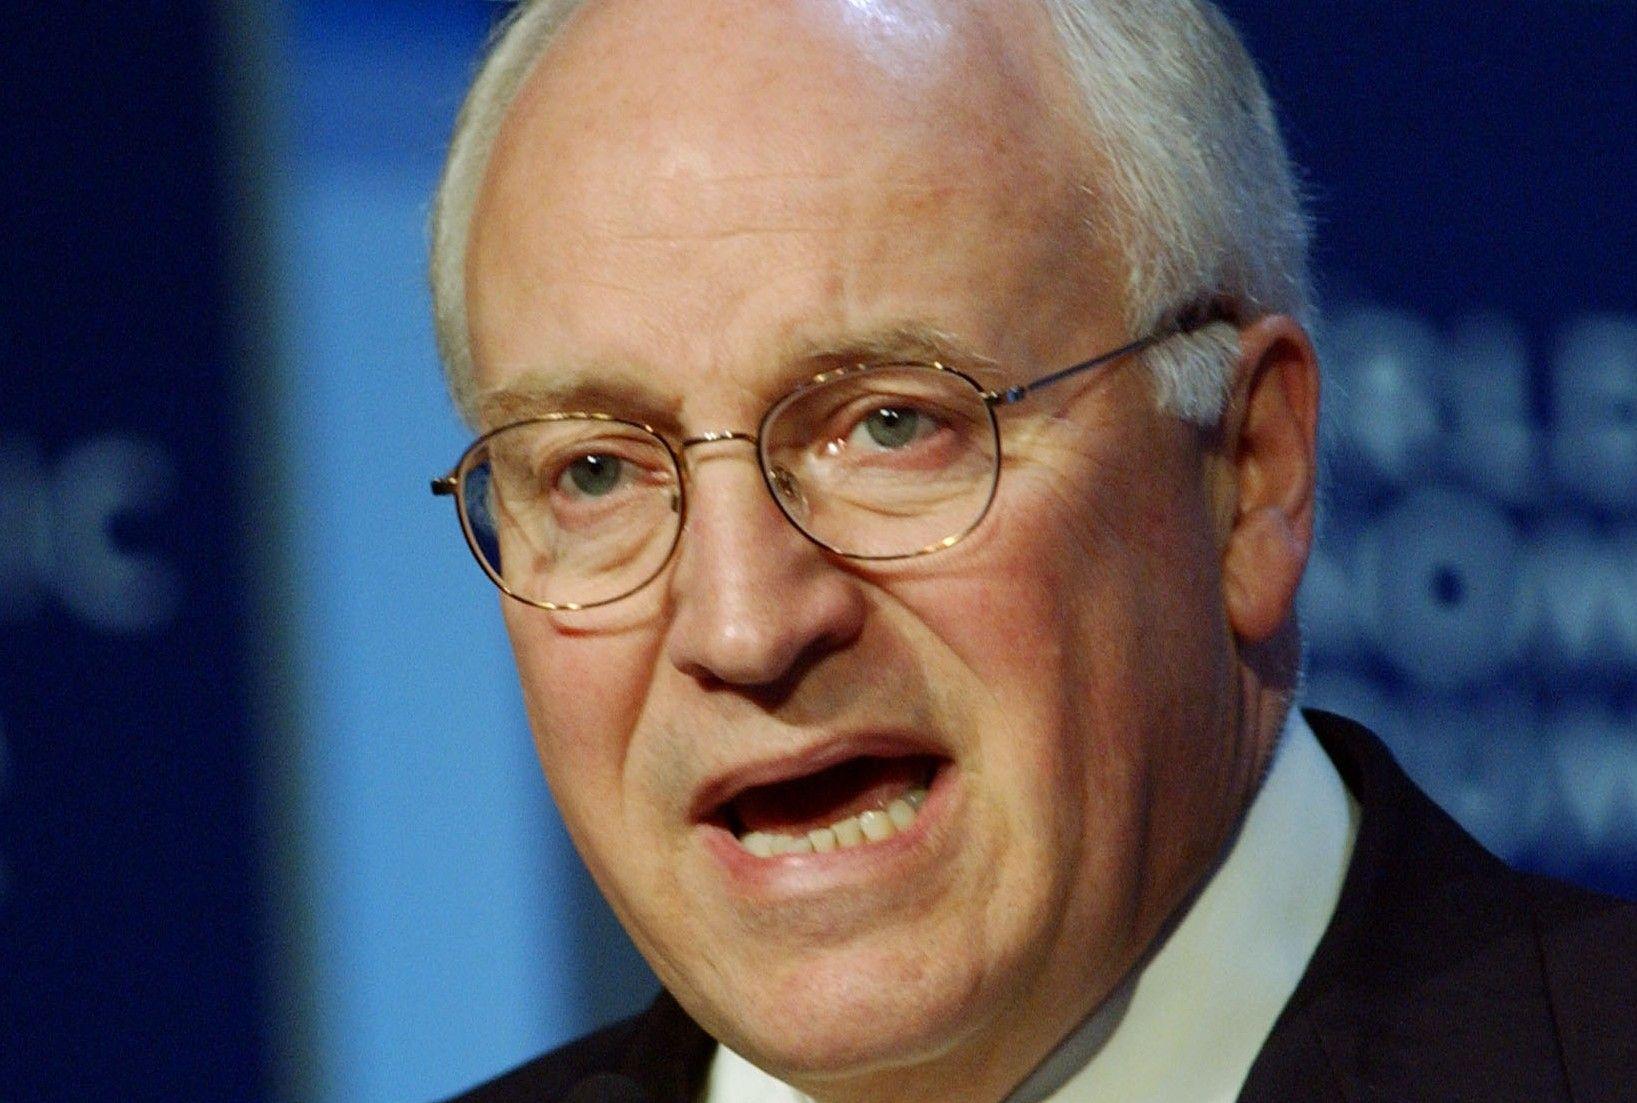 Goldfinger reccomend Dick cheney so answer